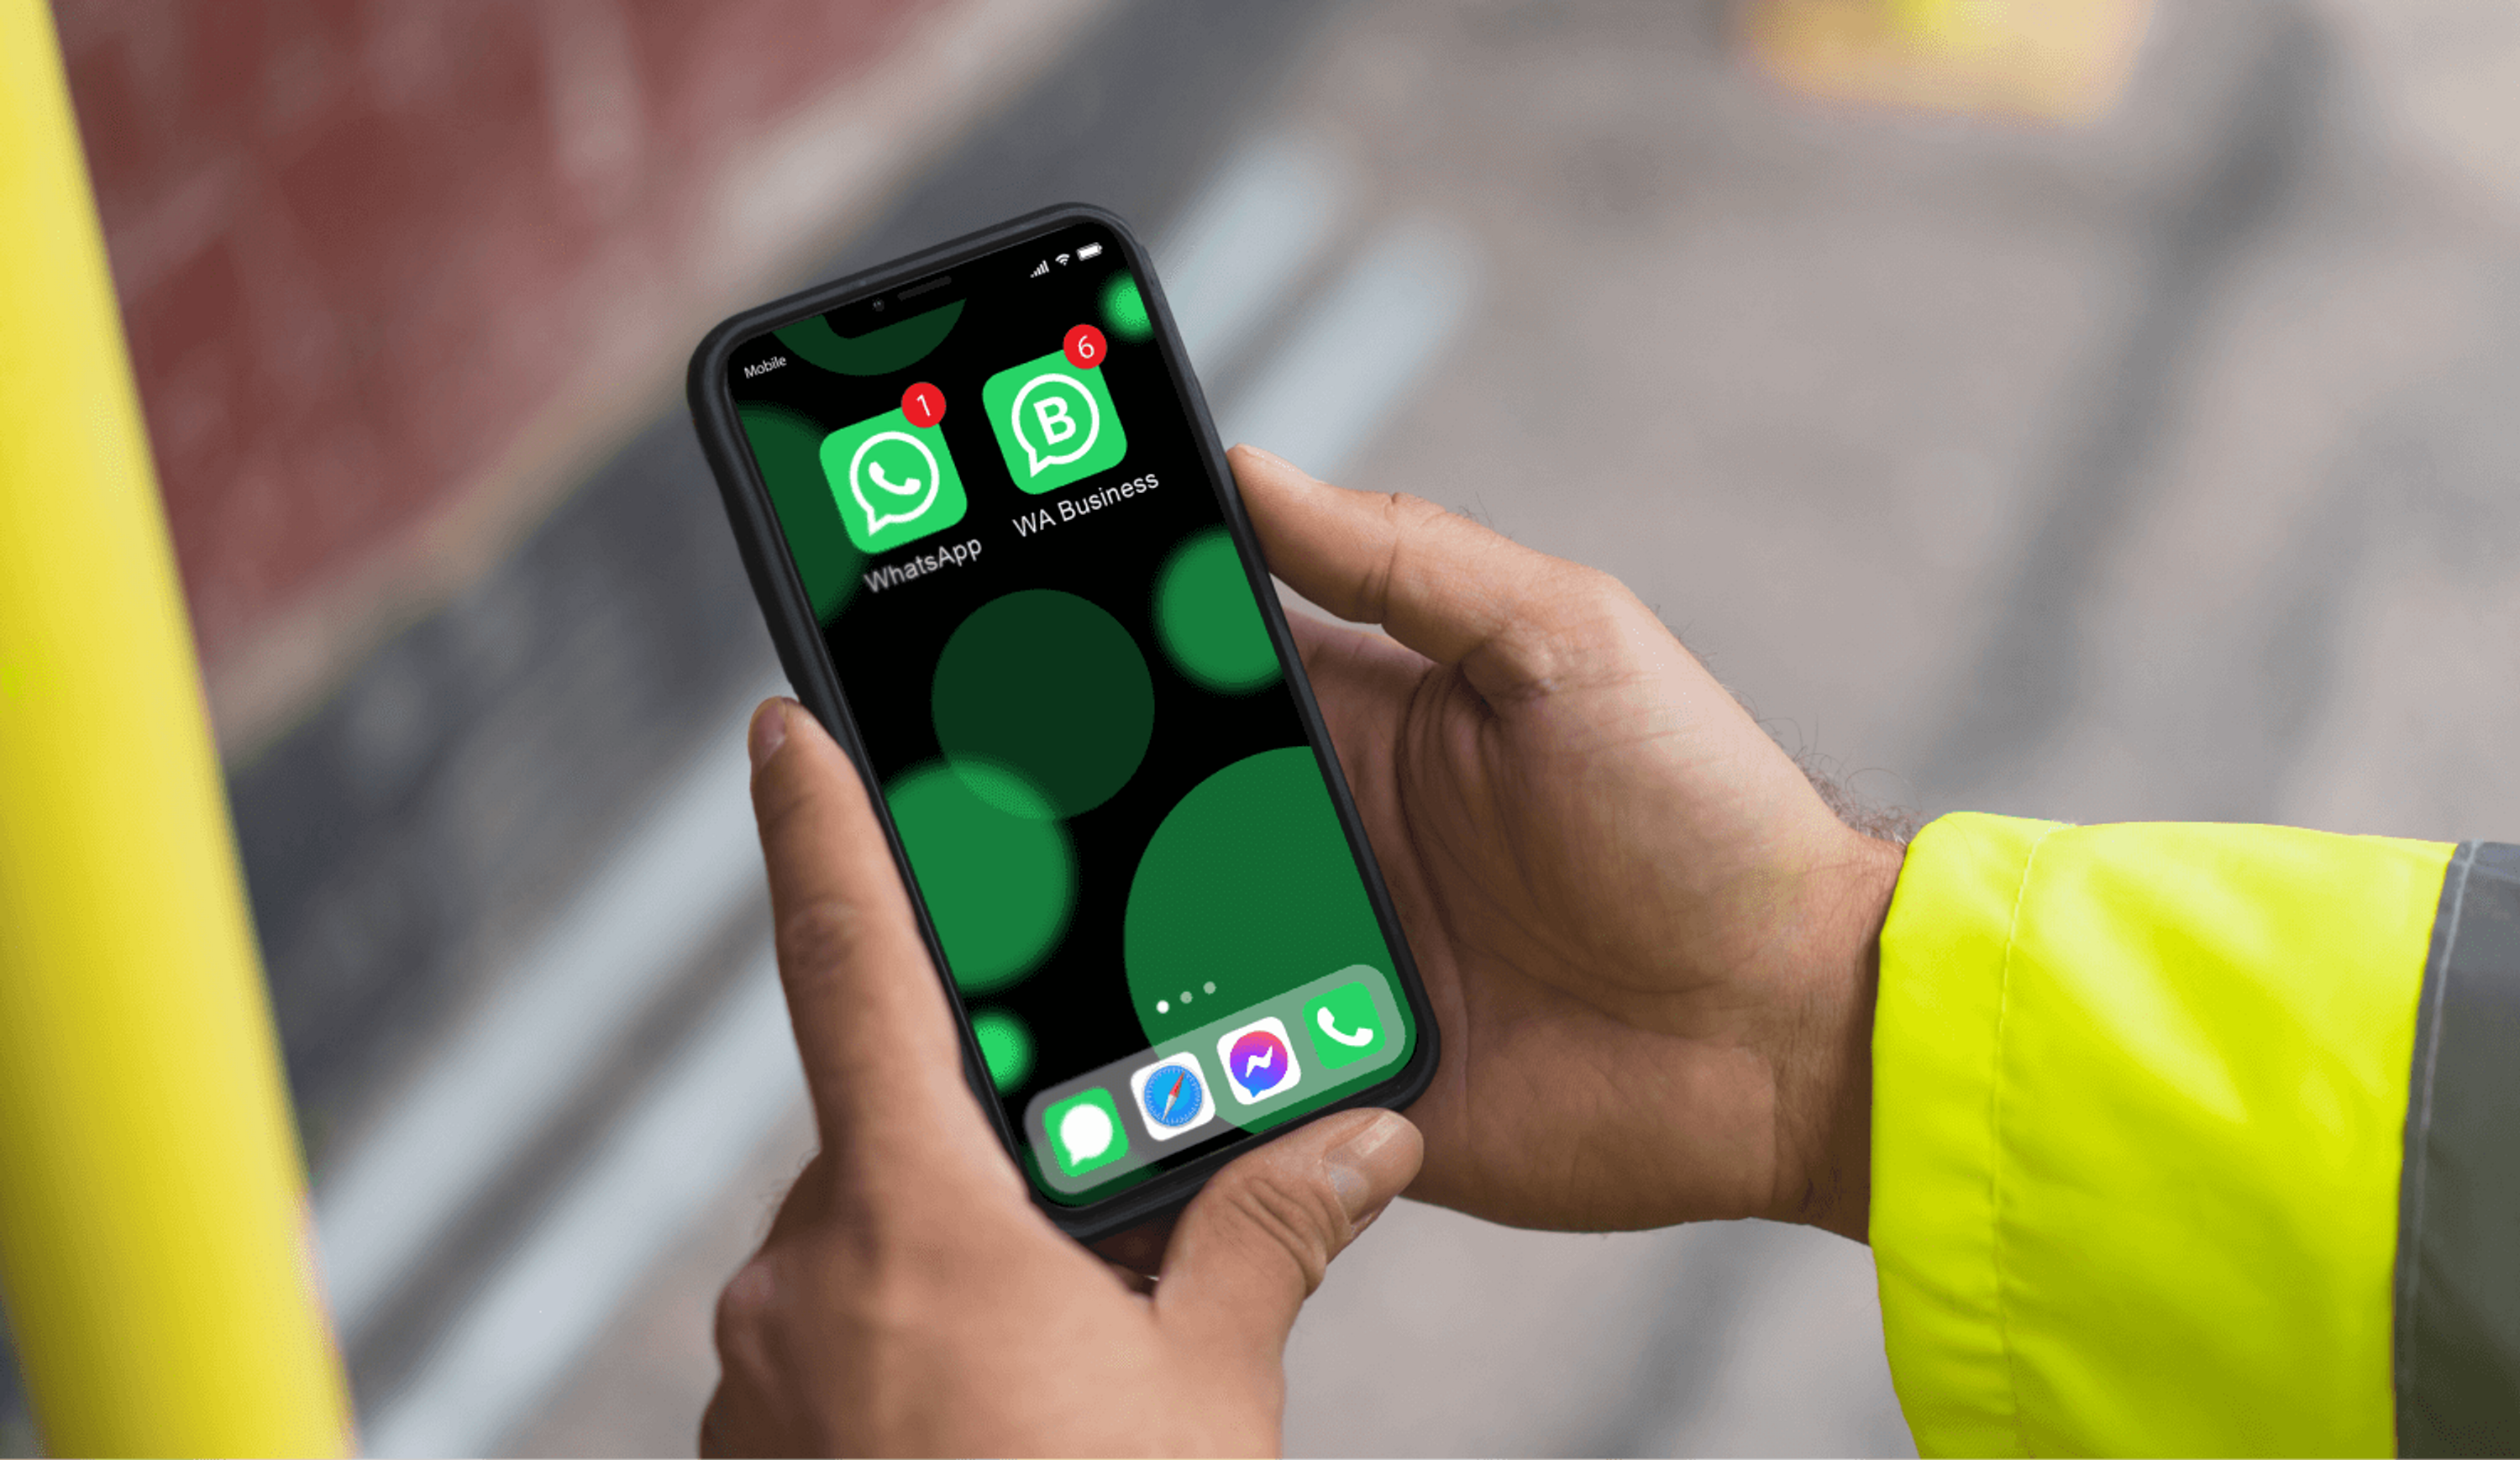 Construction worker hands holding a phone with WhatsApp and WhatsApp Business installed on it